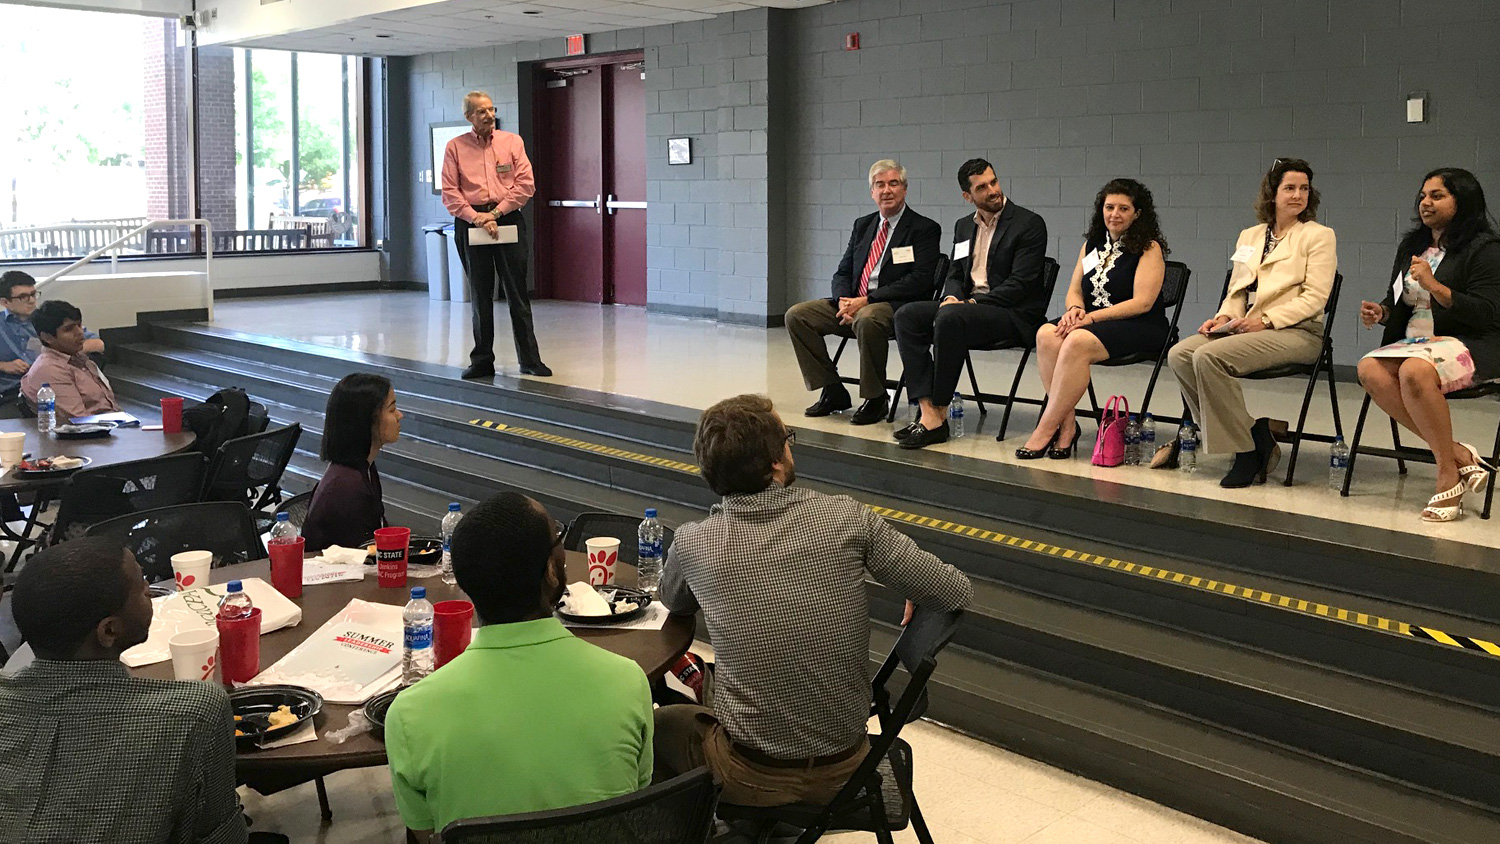 Accounting professionals and students discuss accounting career paths at 2019 NCACPA Leadership Conference at NC State University. Panelists, left to right, are David Erwin, NC Department of State Treasurer; Jared Korver, Beacon Wealthcare; Amy Hilliard, Dixon Hughes Goodman; Alice Mariano, NC Farm Bureau Mutual Insurance Company; Abi Raja, Ply Gem.